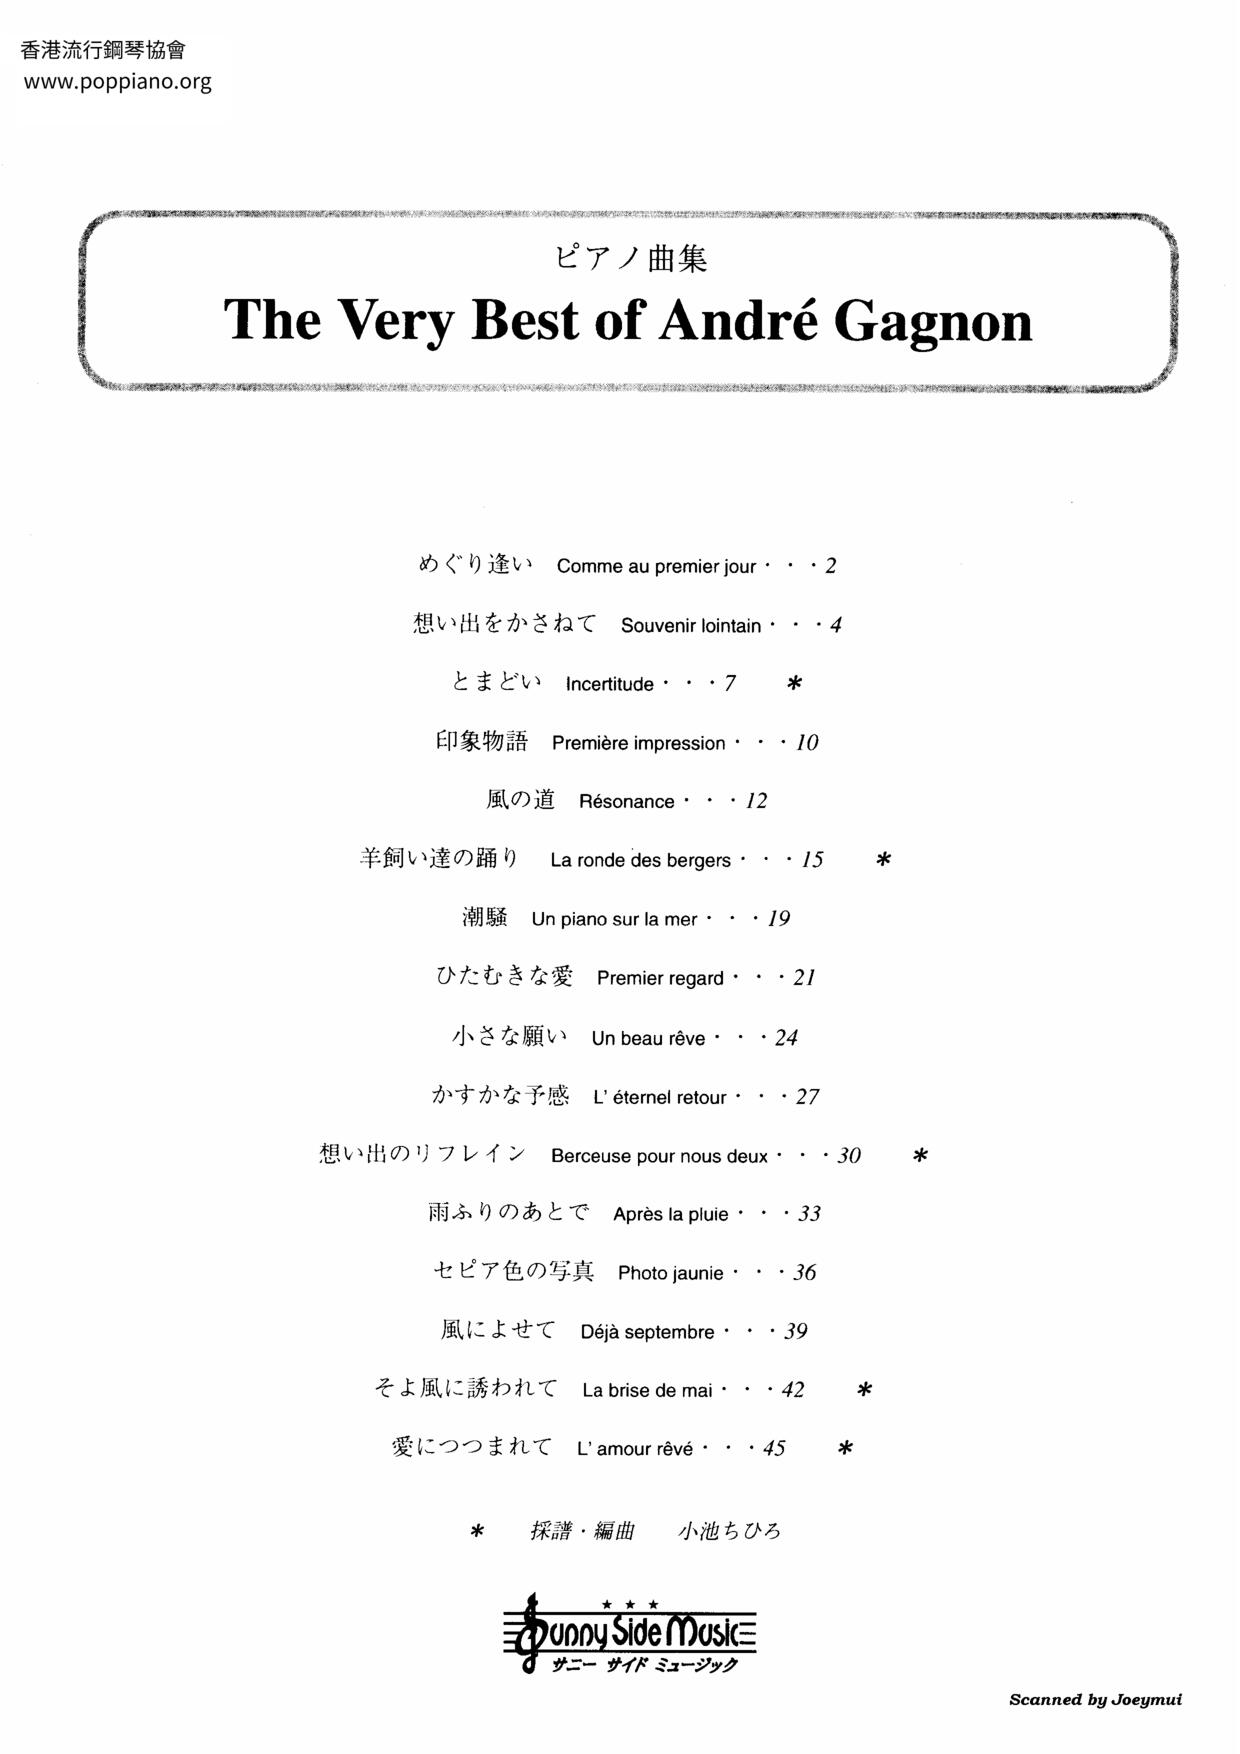 The Very Best of Andre Gagnon 46 pages Score